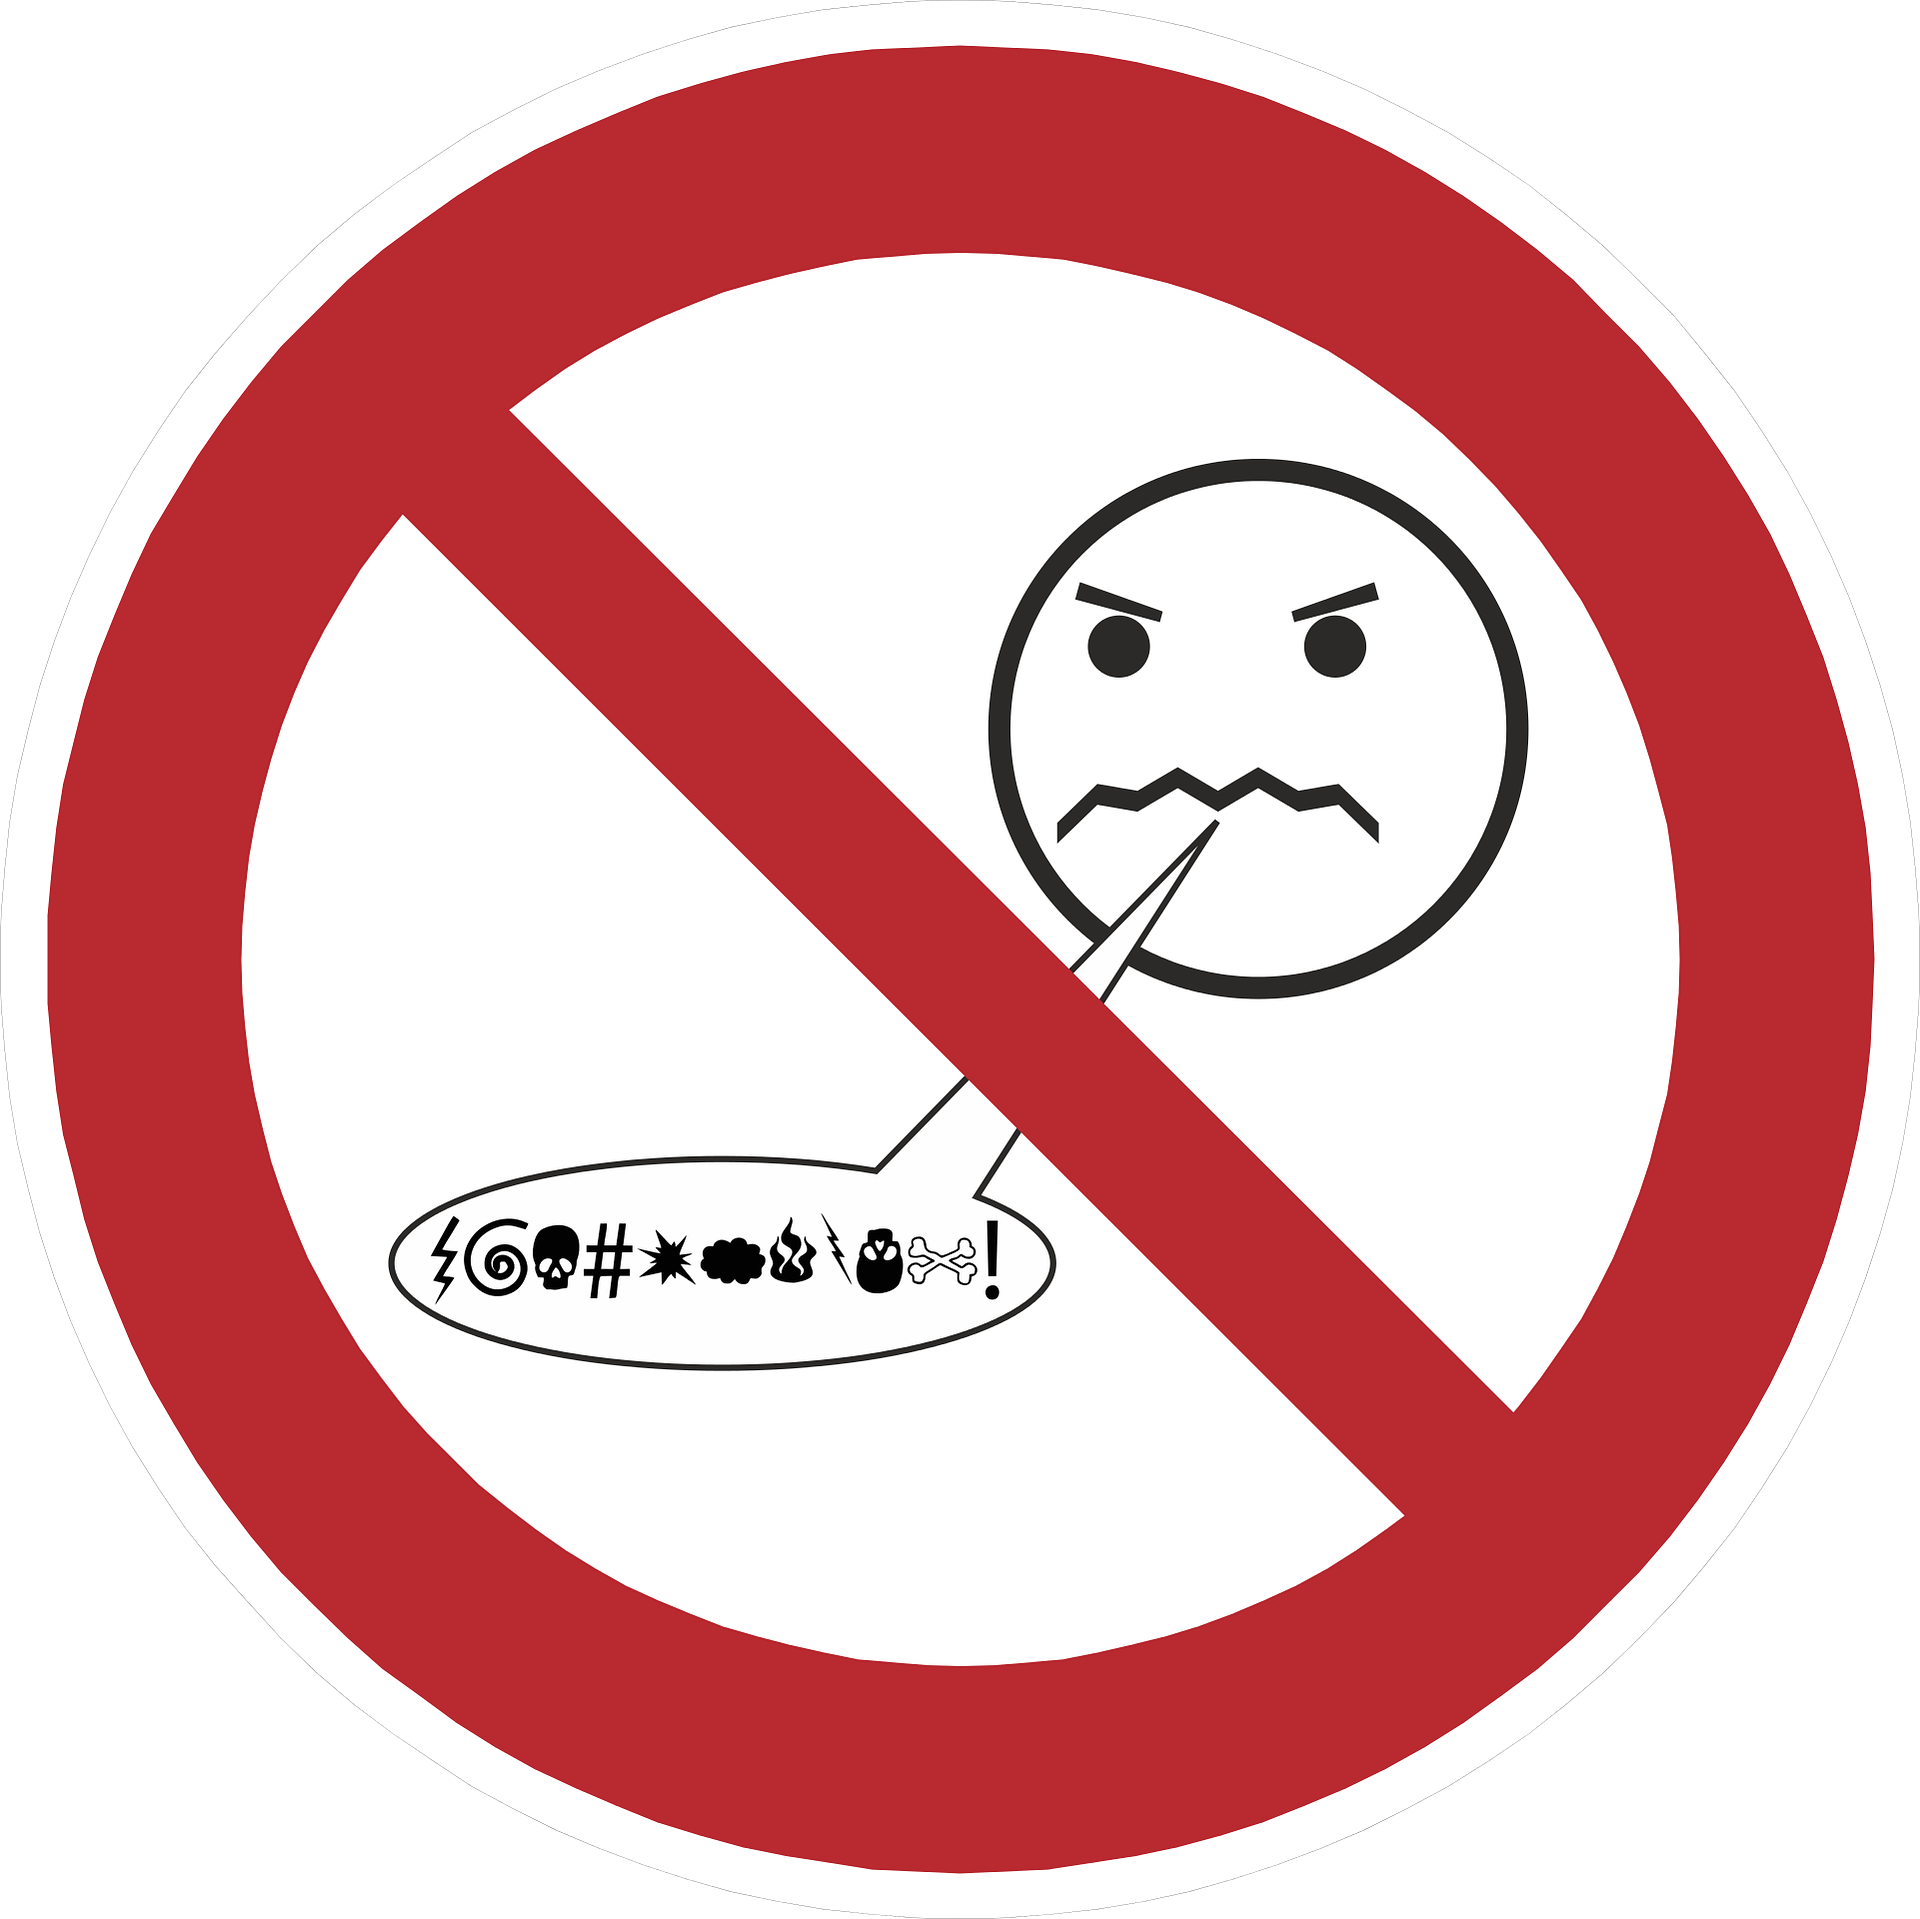 huff and puff behind stop symbol